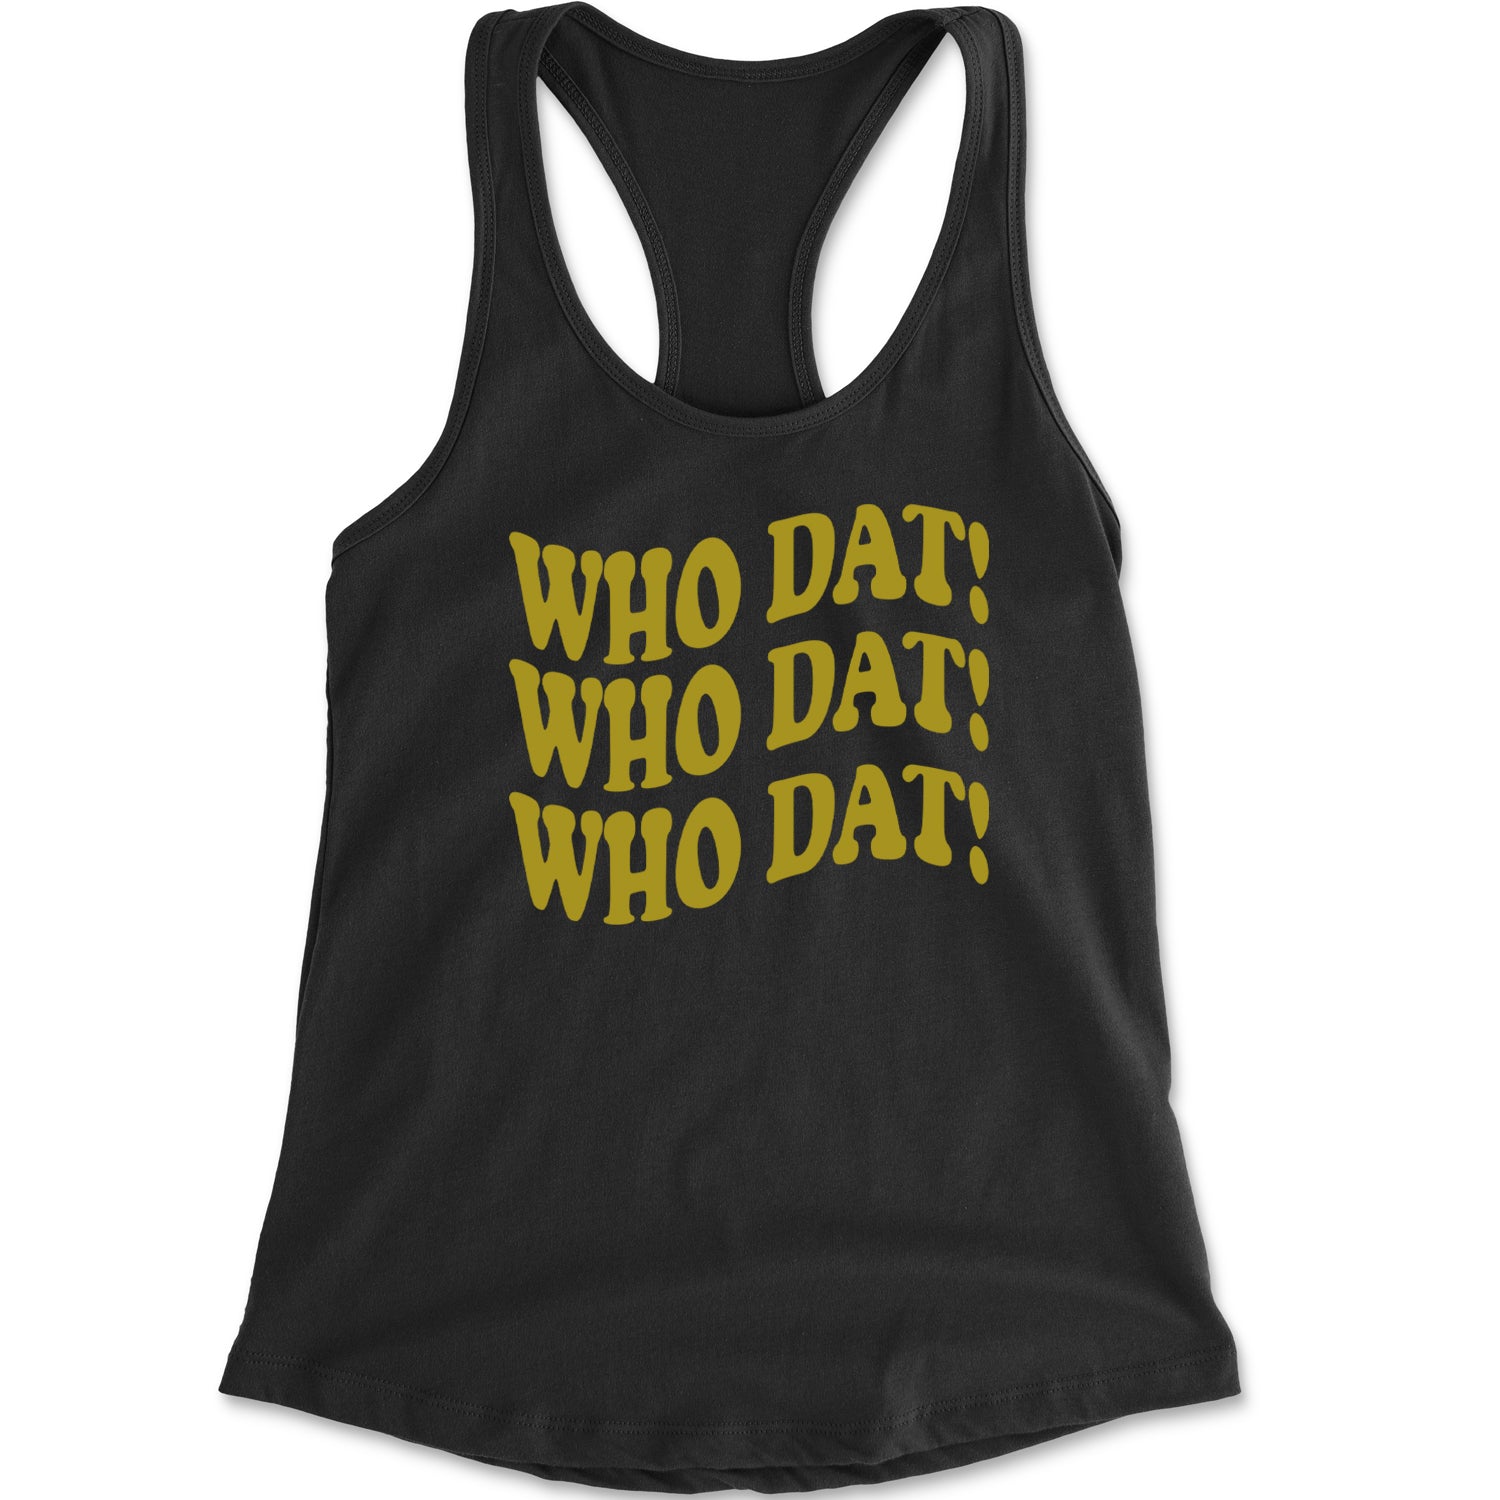 Who Dat Wavy Design Who Dat Nation Racerback Tank Top for Women